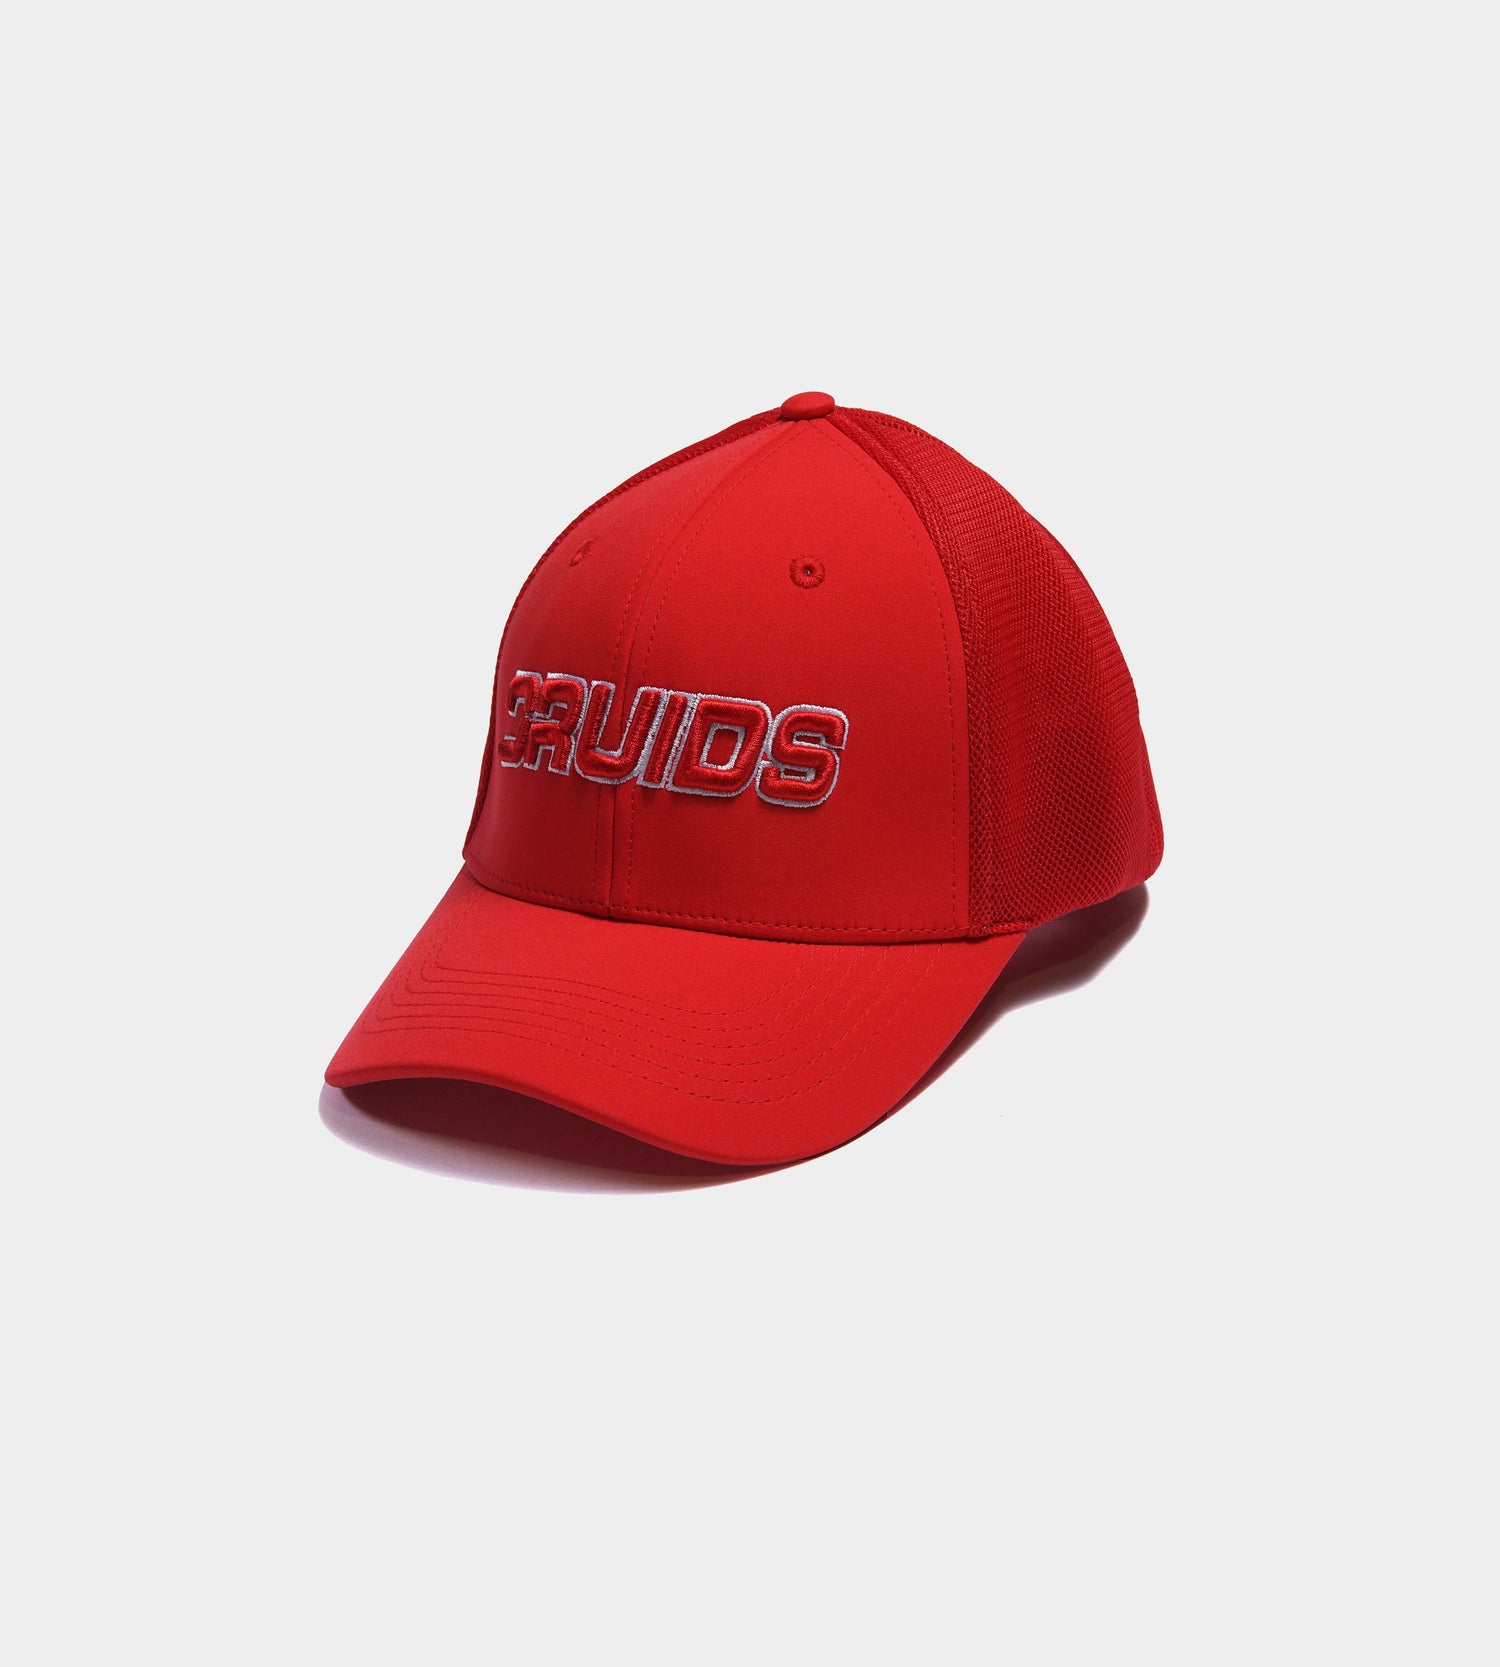 OUTLINE FITTED TRUCKER CAP - RED - DRUIDS